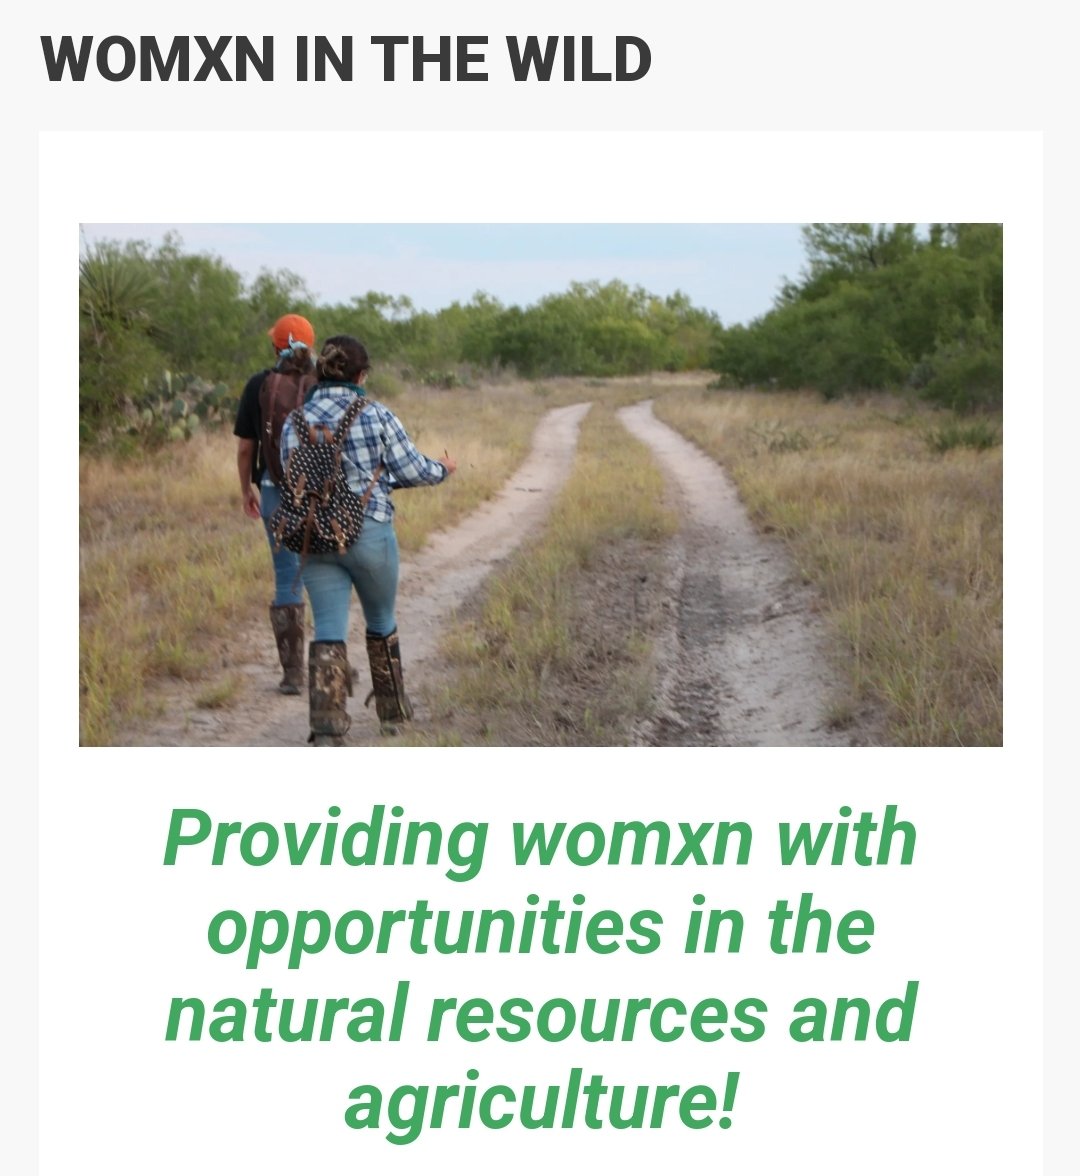 It's Giving Day! I’m leading a campaign called Womxn in the Wild. Check out the campaign page (givingday.cpp.edu/giving-day/885…) to learn more about the project and how you can help womxn gain natural resources and agriculture experiences!

#wildlife #naturalresources #agriculture